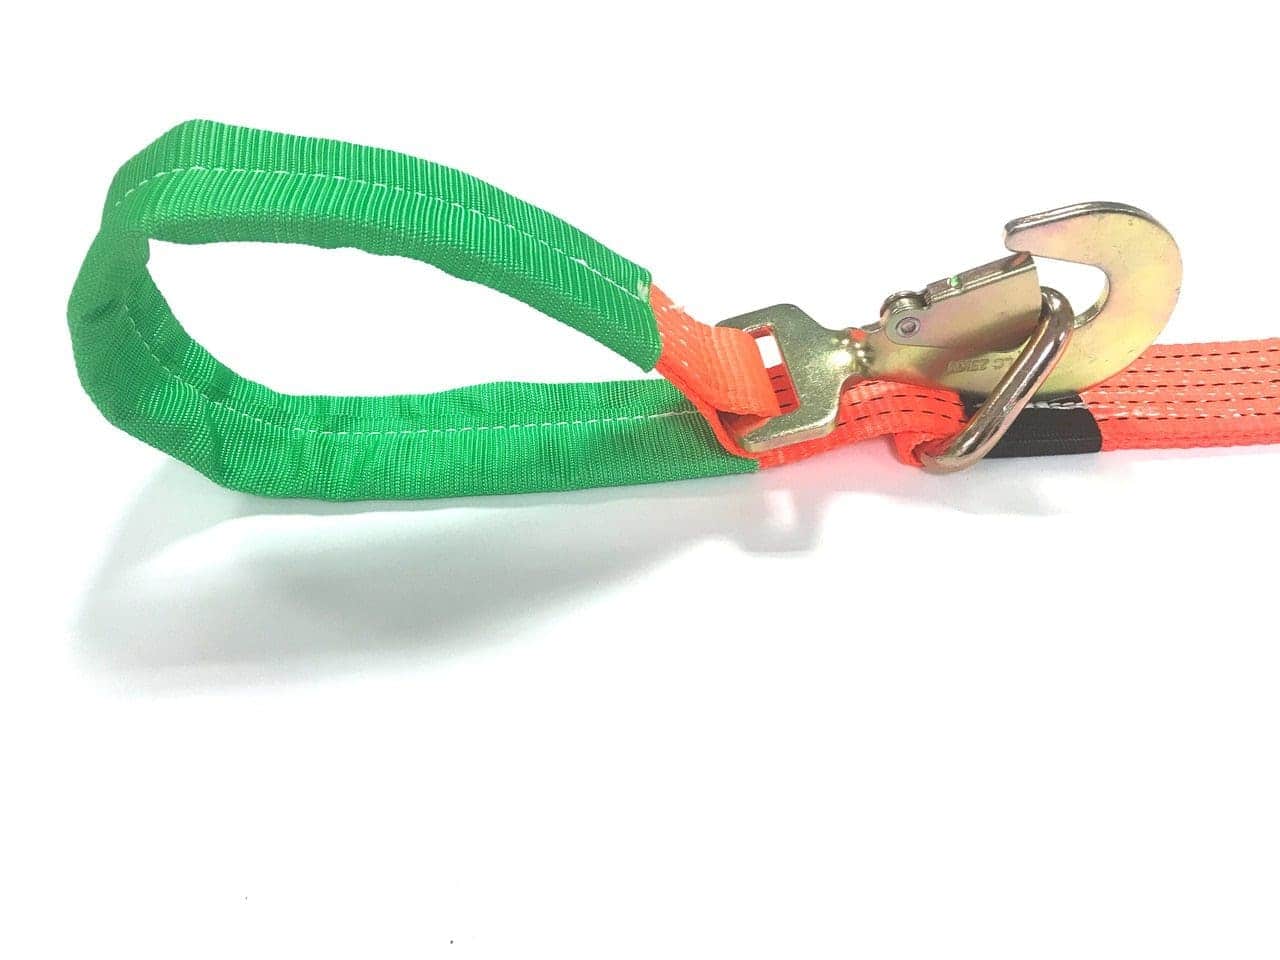 Recovery ratchet transporter safety strap with snap hook and ring